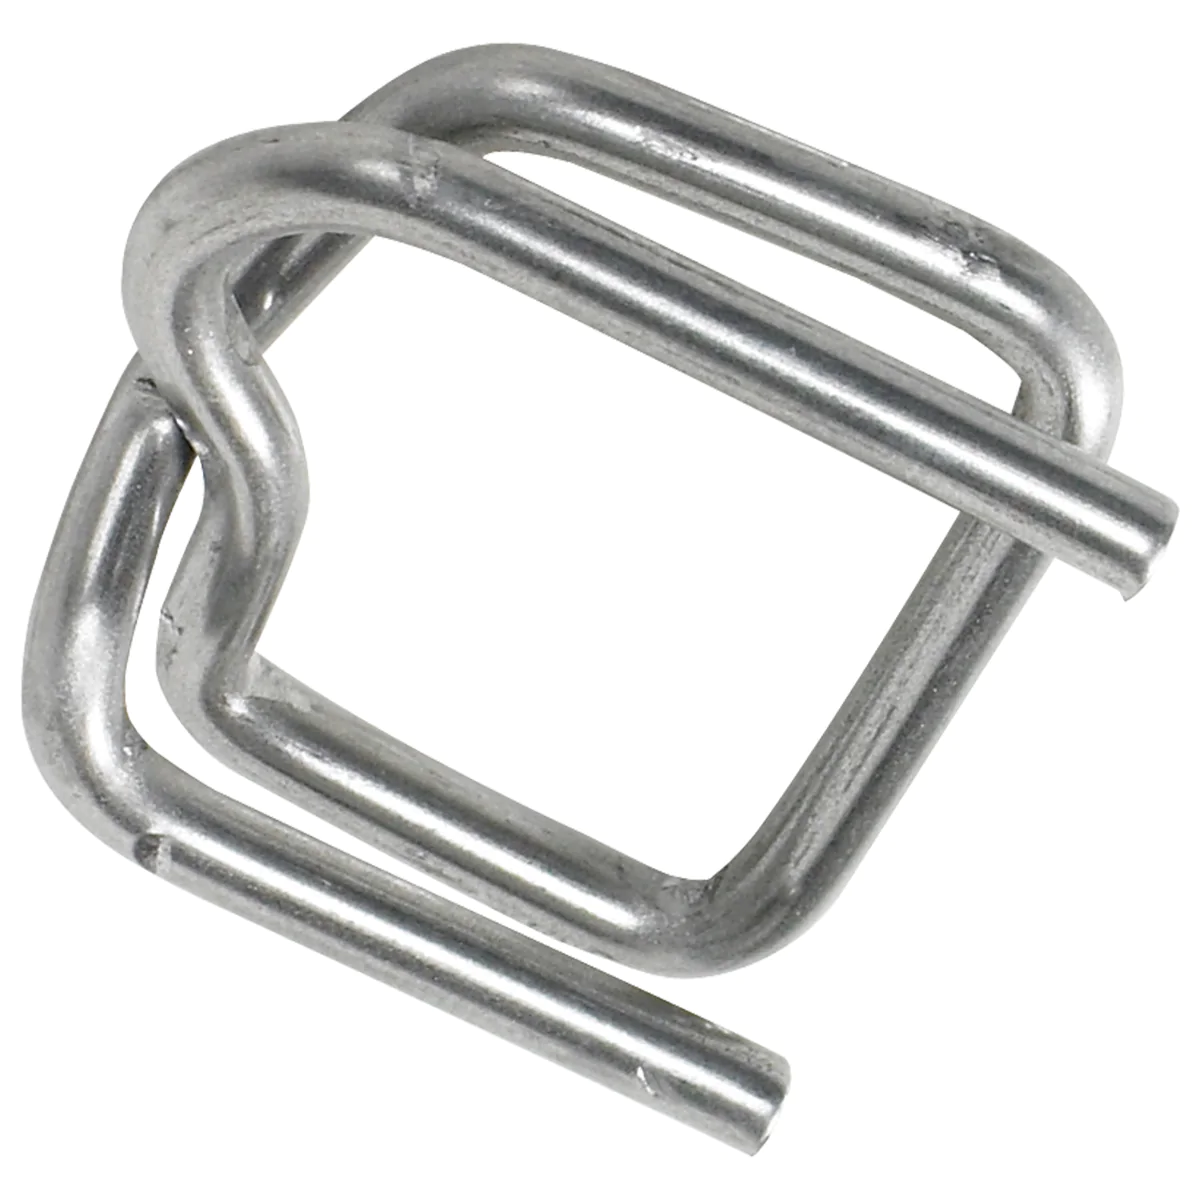 Seals and Buckles for Plastic Strapping